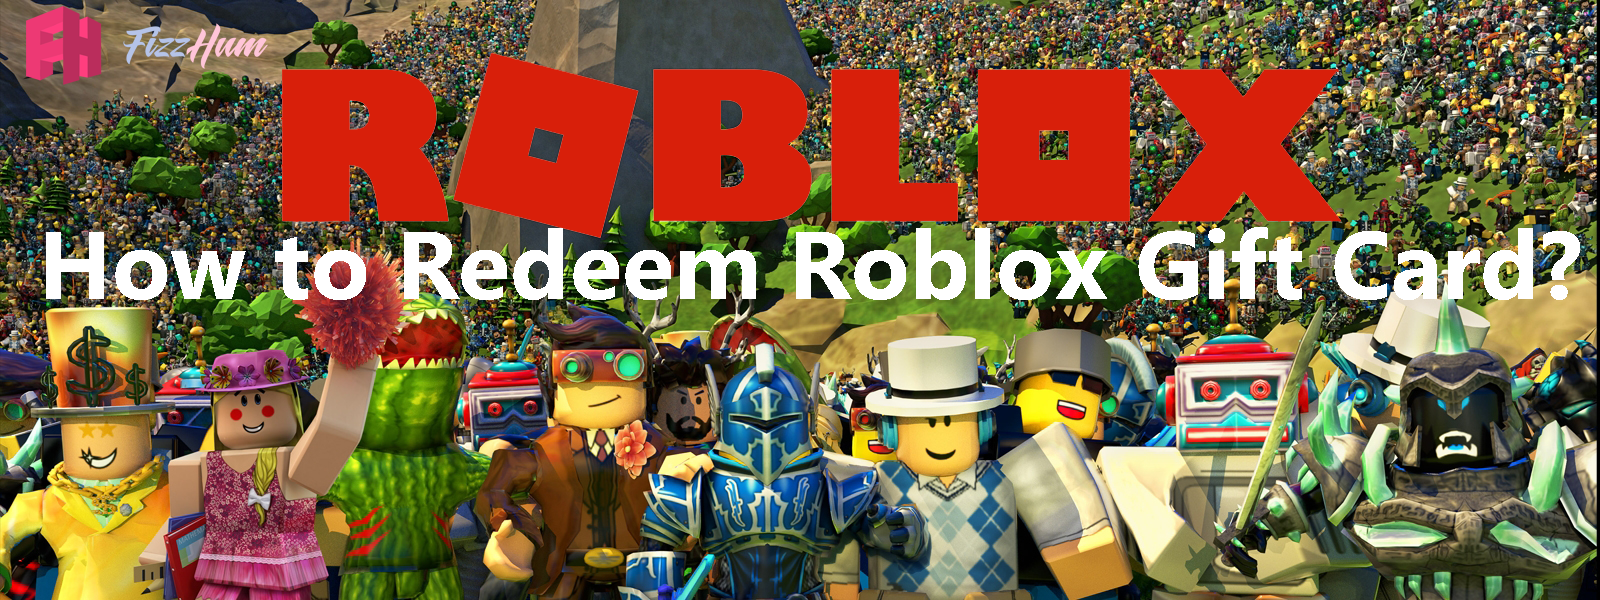 How To Redeem Roblox Gift Card Step By Step 2021 Fizzhum Com - roblox keyword parties